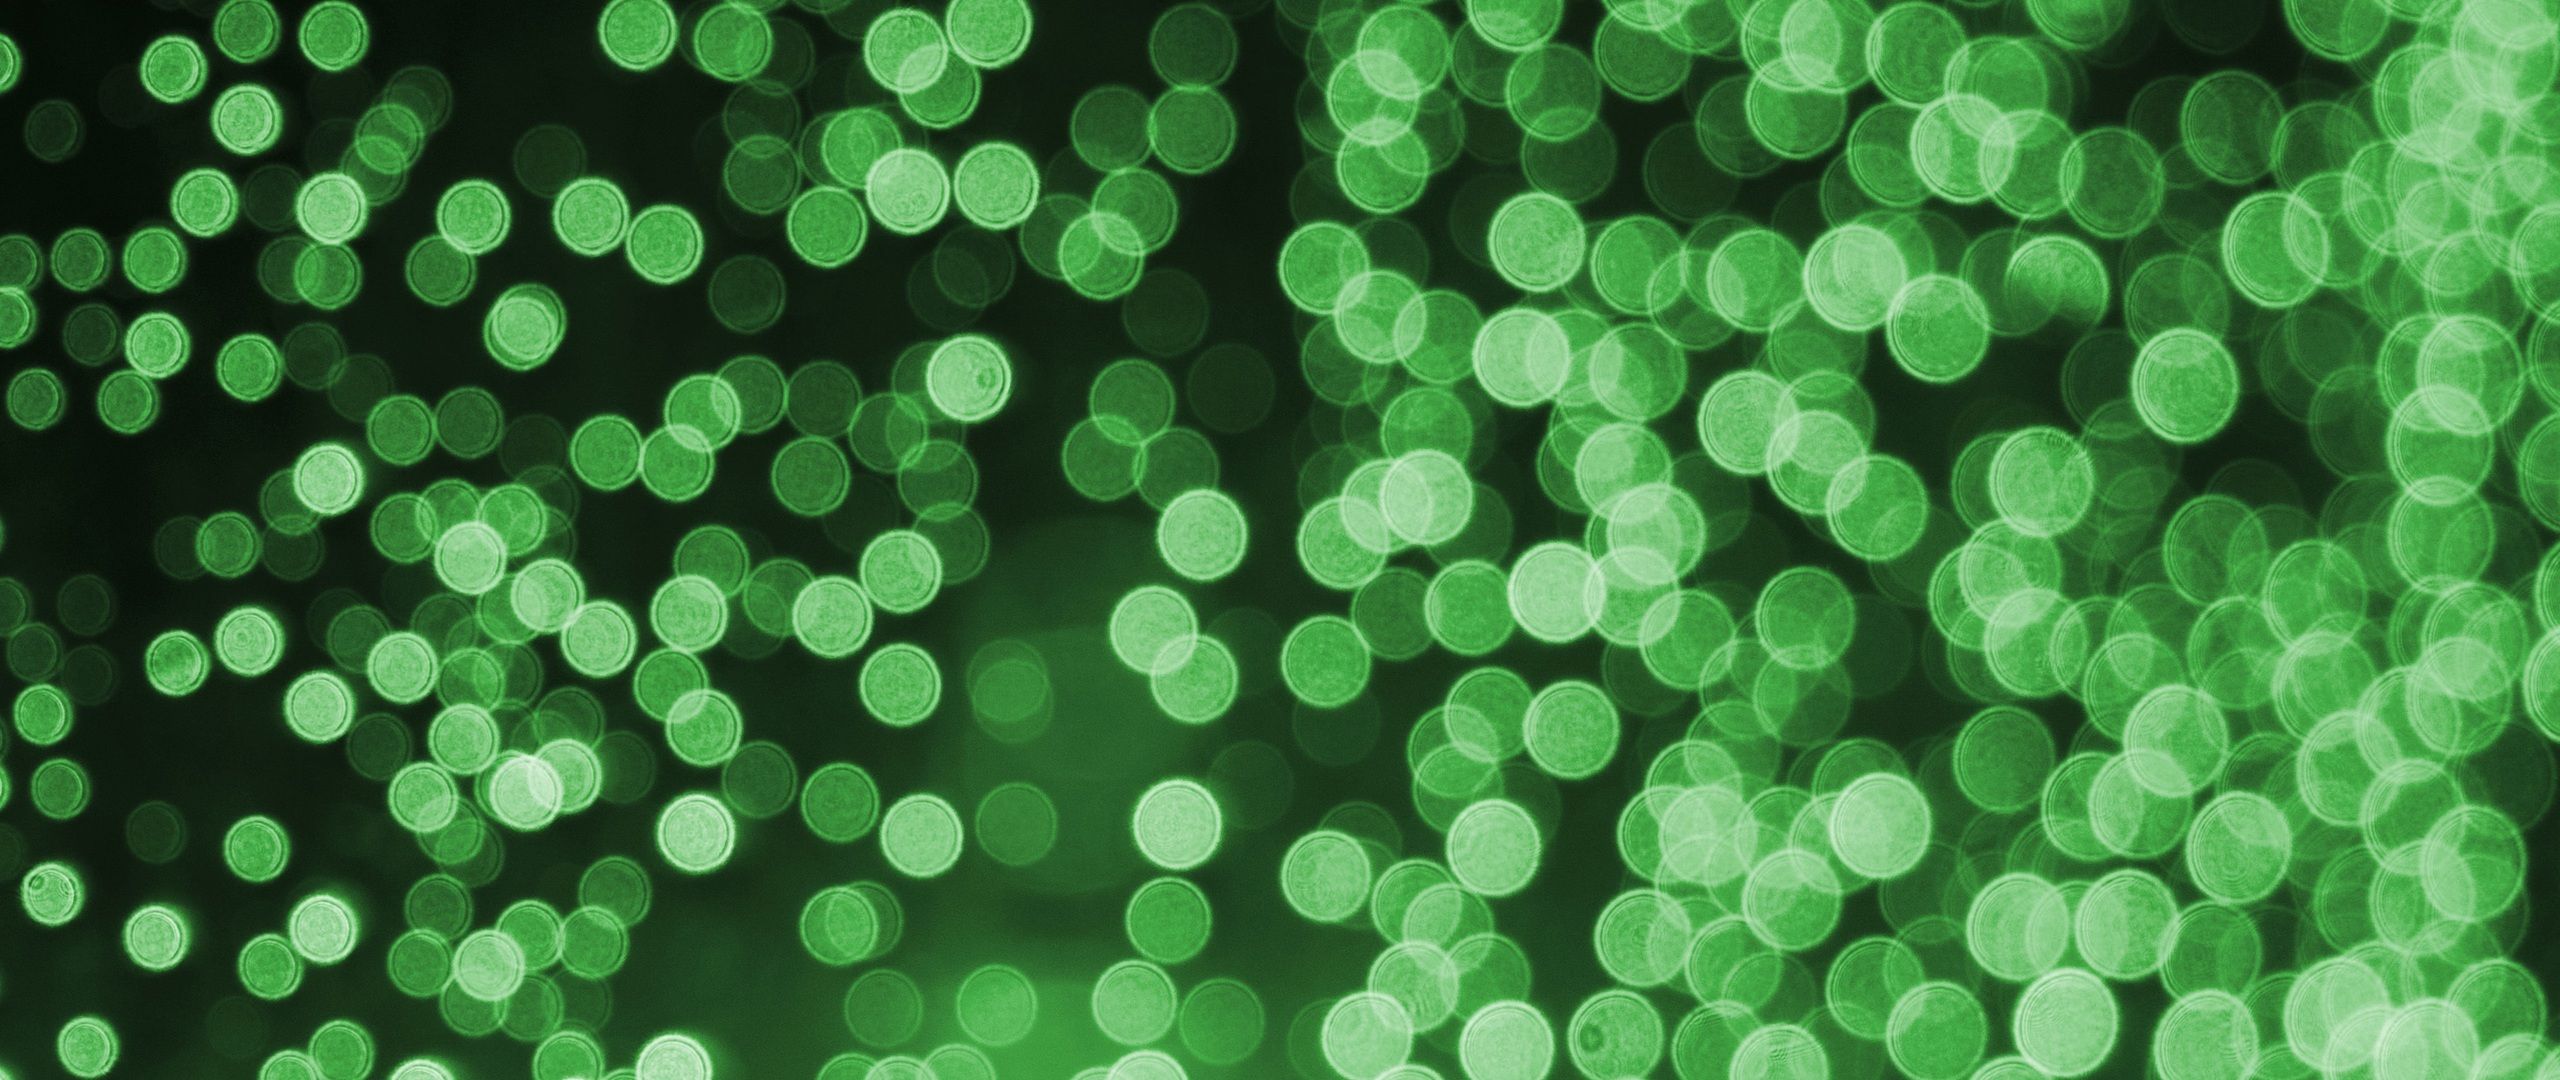 2560x1080 Bokeh Effect Green Lights Celebrations 2560x1080 Resolution Hd 4k Wallpaper Image Background Photo And Picture